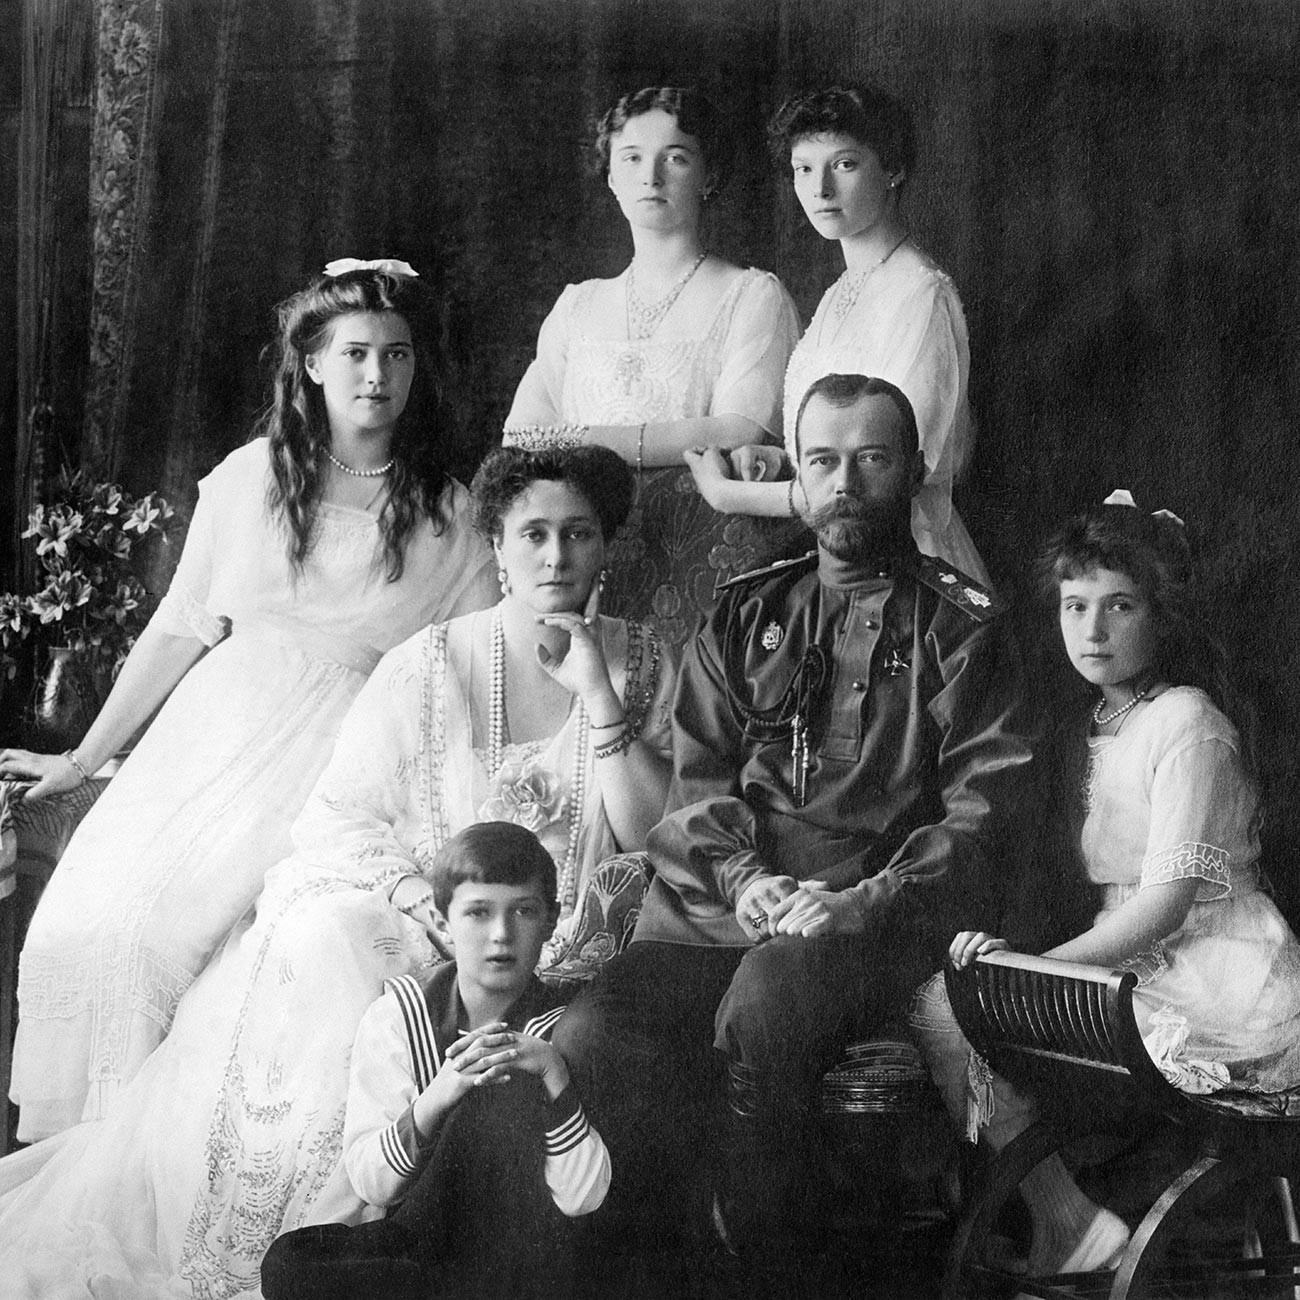 The Russian royal family in 1913.